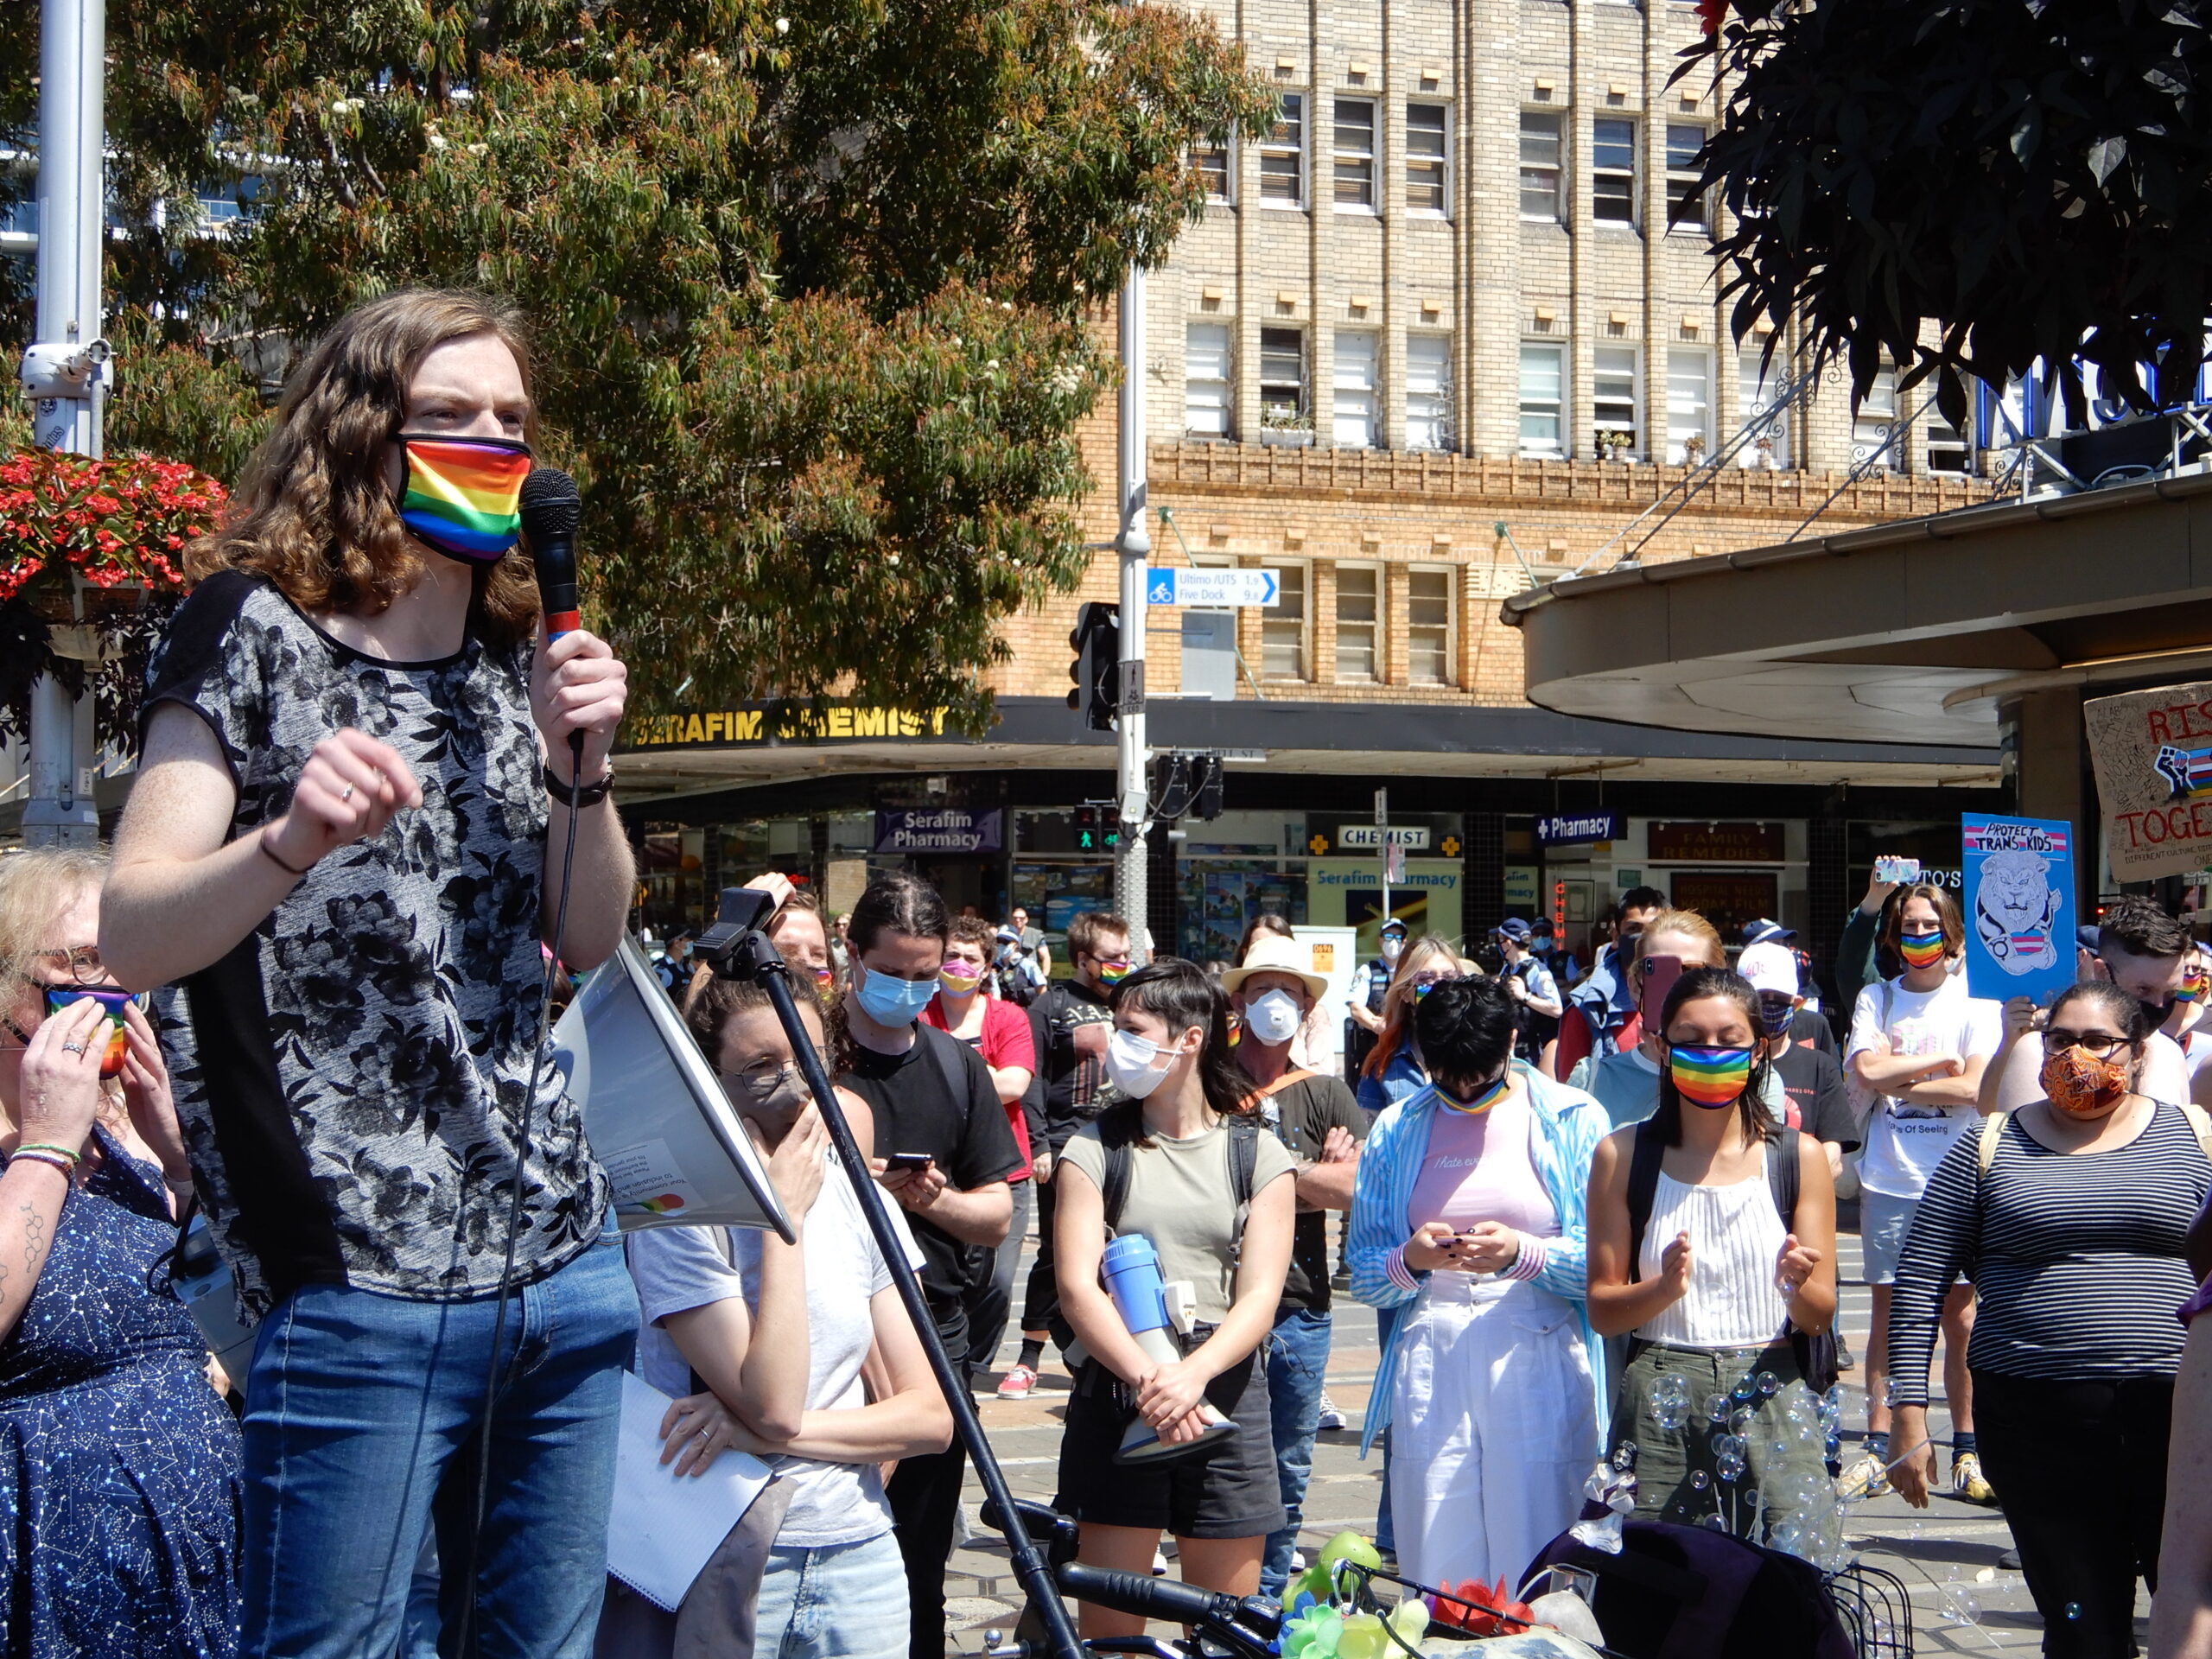 April Holcombe addresses the Protect Trans Kids Rally